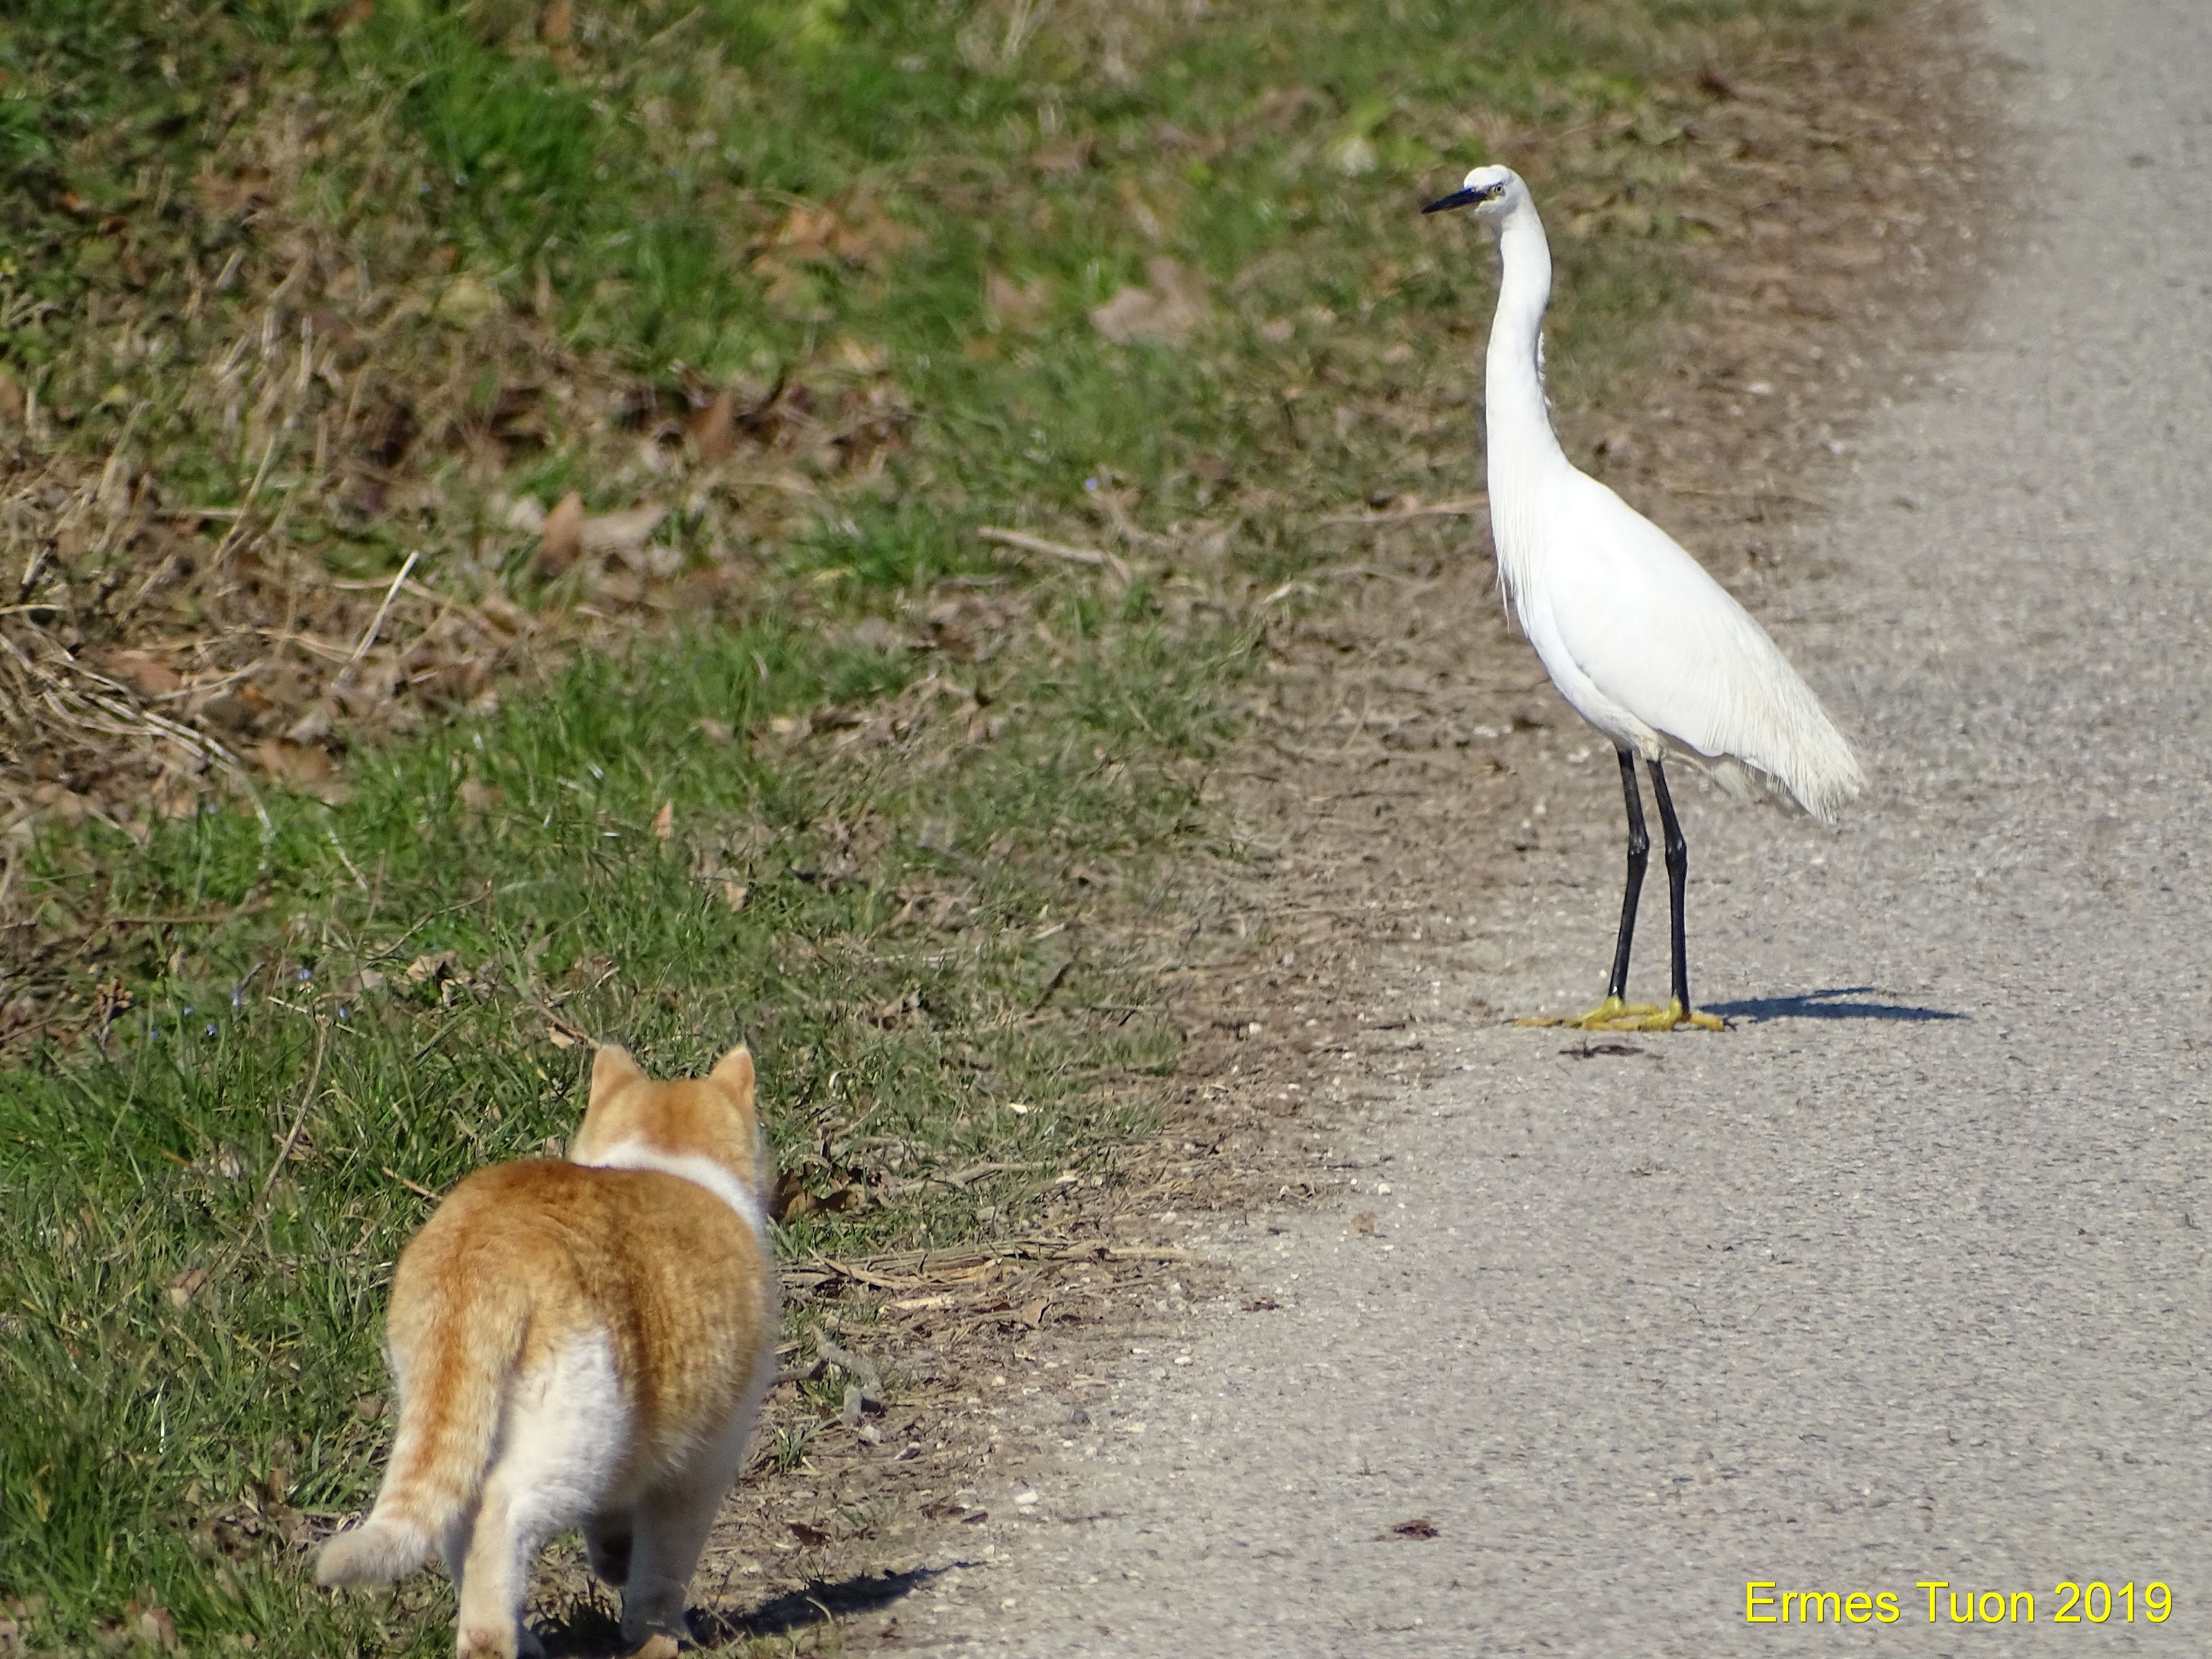 Caption: a cat trying to approach an egret - Local Guide @ermest